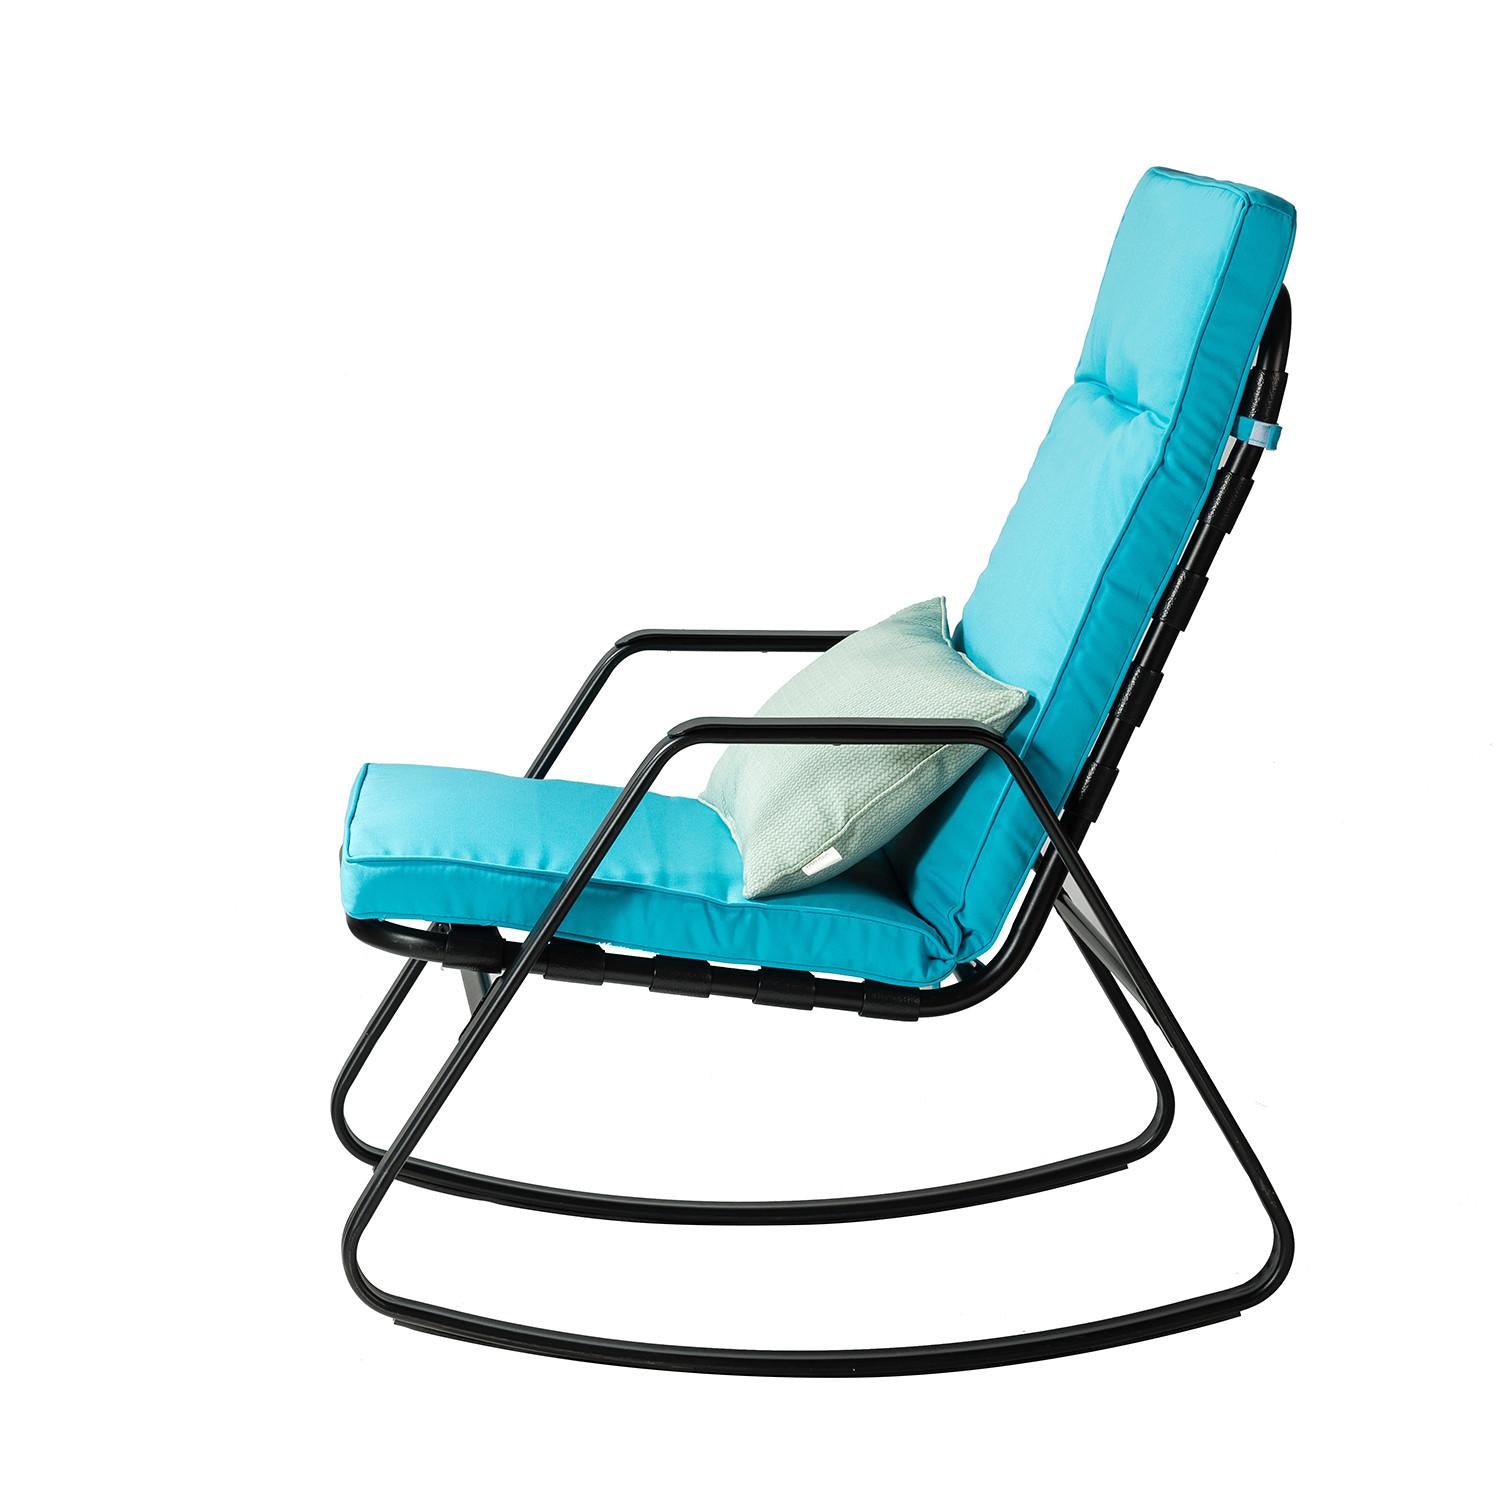 Light Blue Outdoor Rocking Chair and Table Set